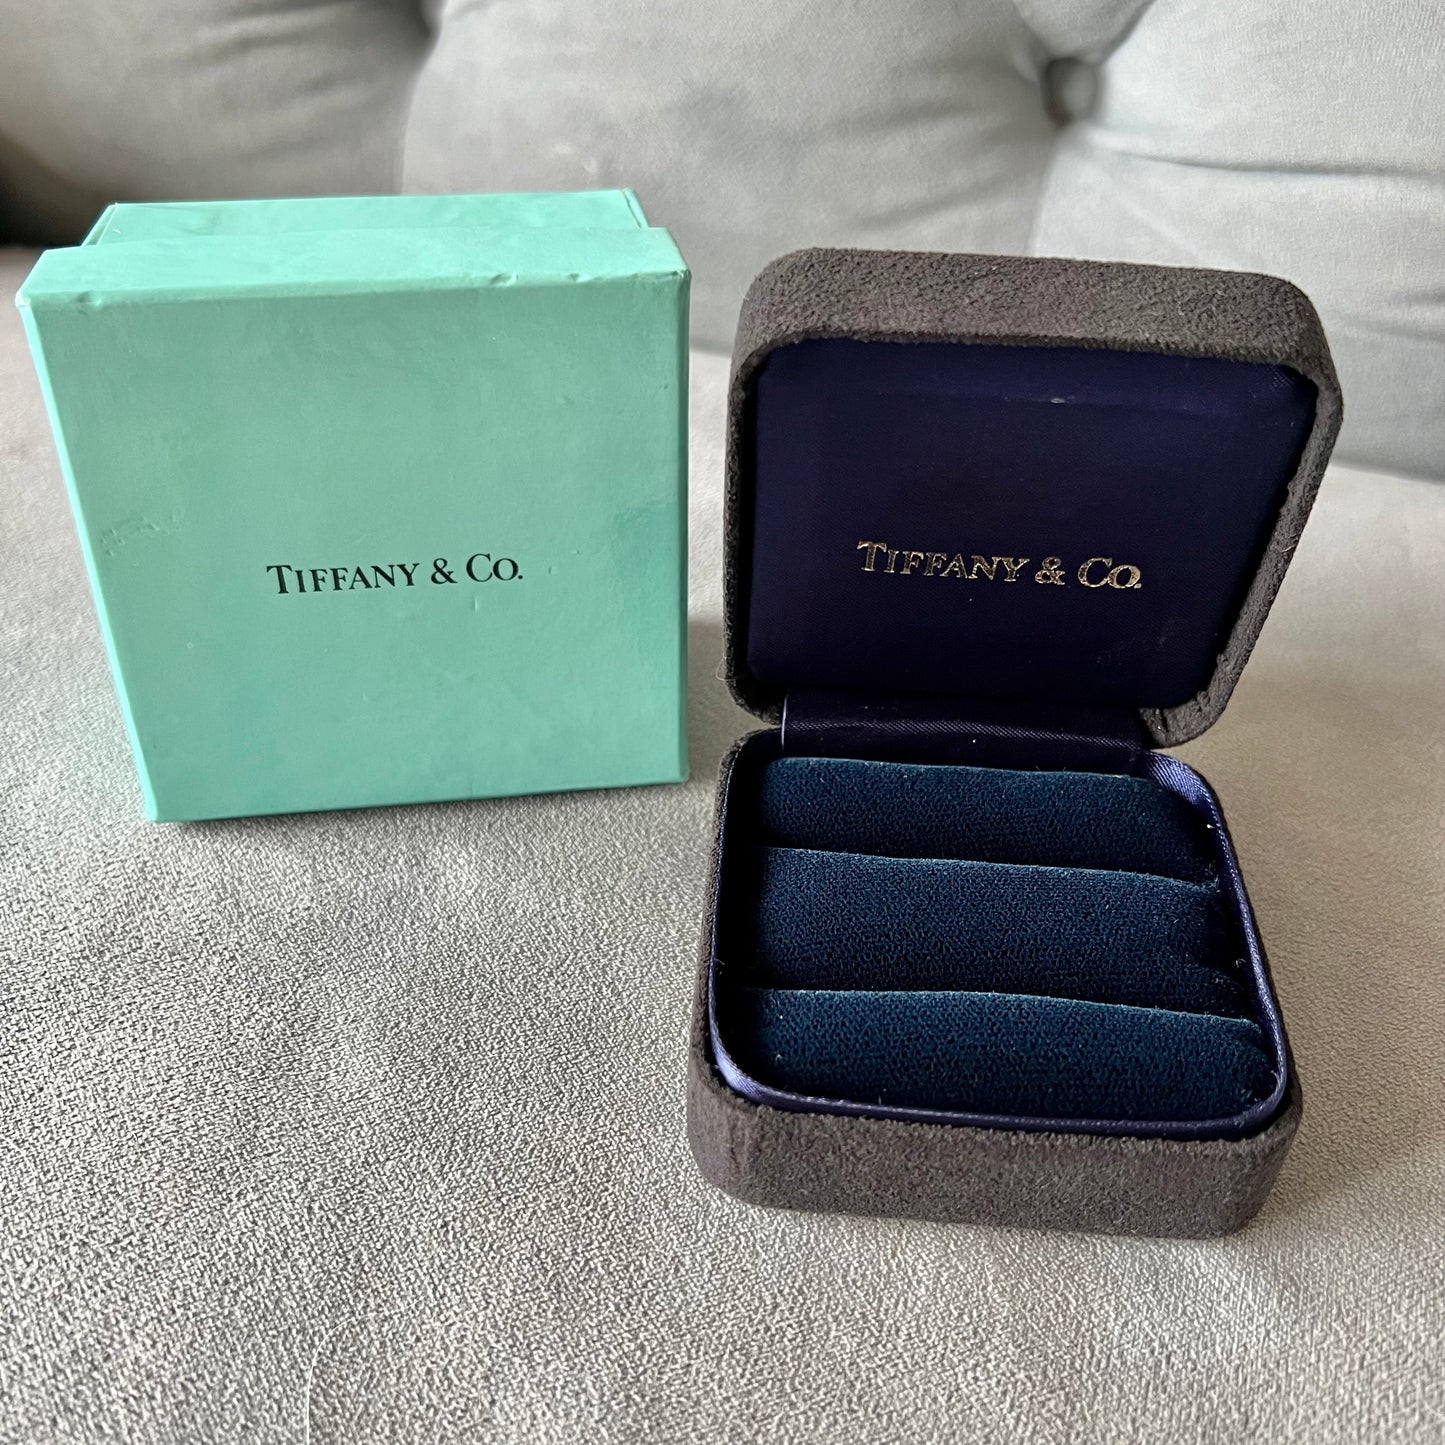 TIFFANY & CO. Double Alliance Ring Box + Outer Box 3.25x3.25x1.90 inches